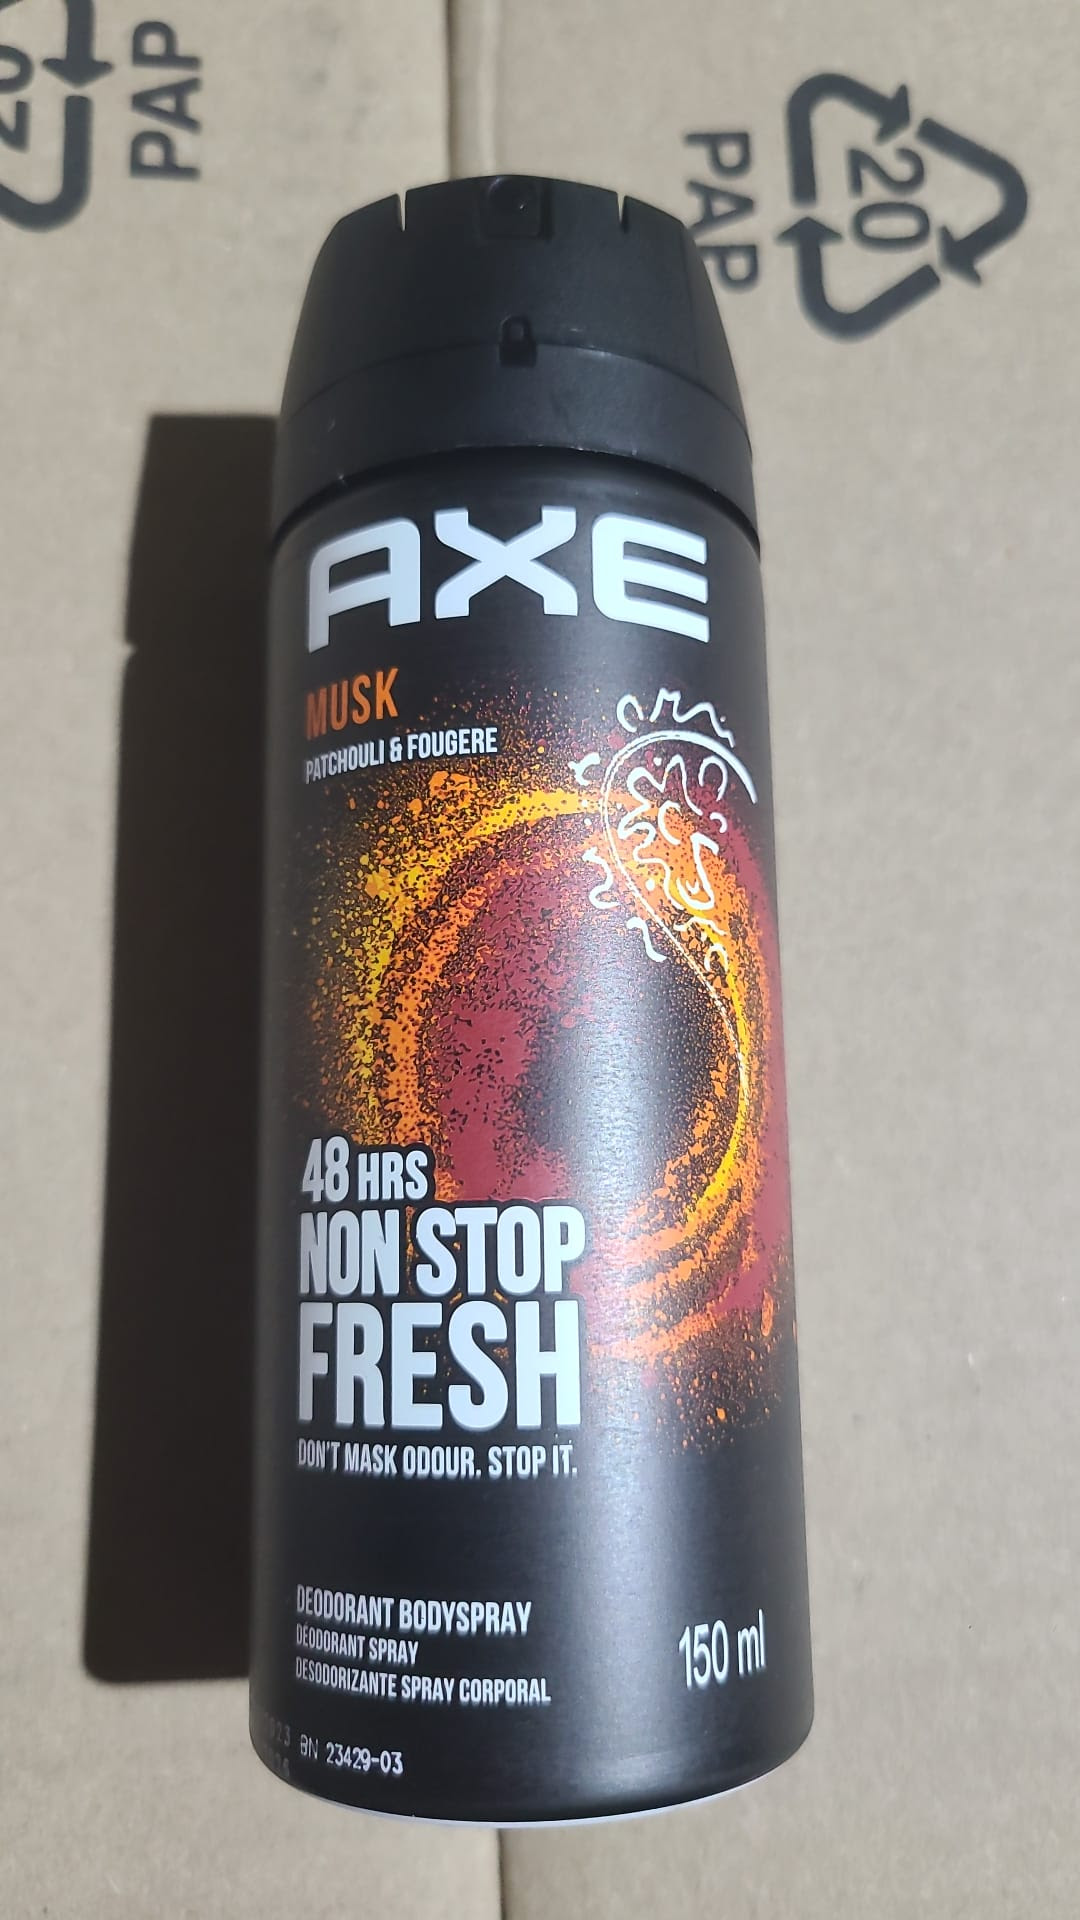 Axe 5.7 Oz (150ml) Wild Spice Body Spray for Men. 36,000 cans. EXW New Jersey $1.90/can.